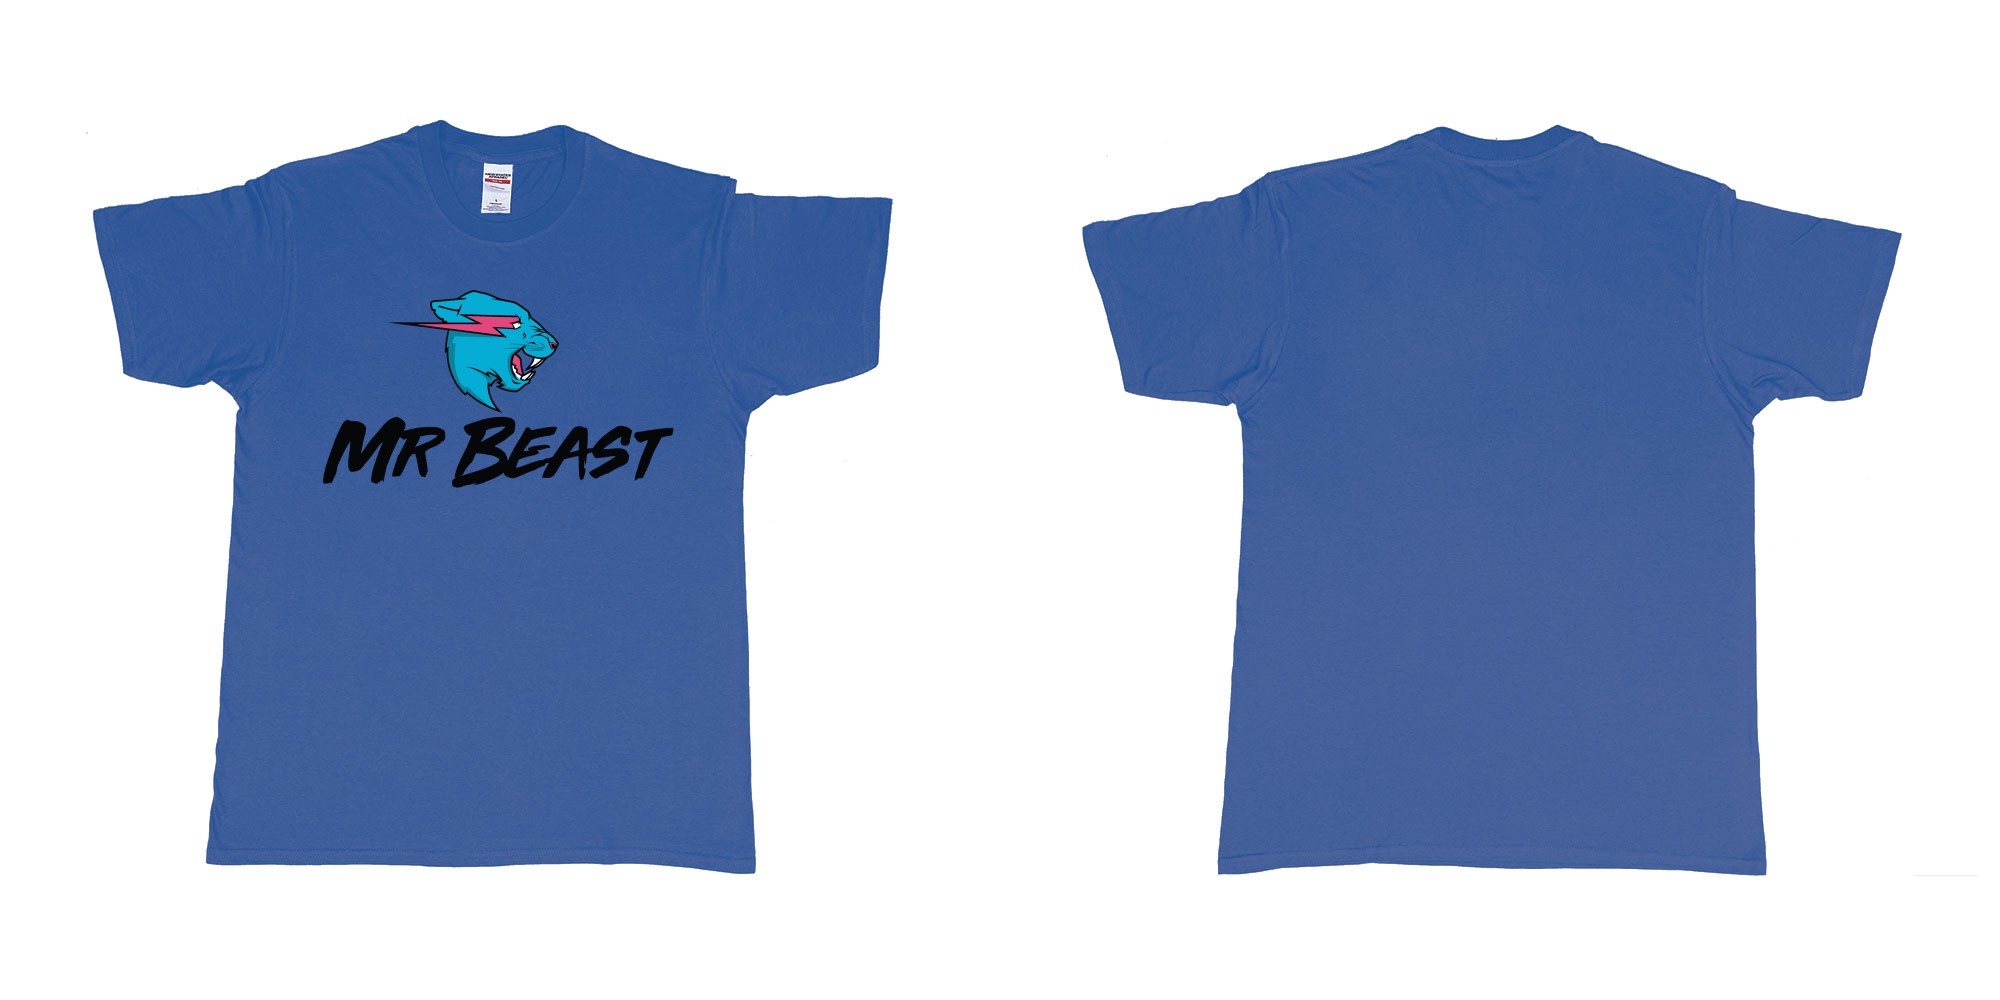 Custom tshirt design mr beast logo in fabric color royal-blue choice your own text made in Bali by The Pirate Way